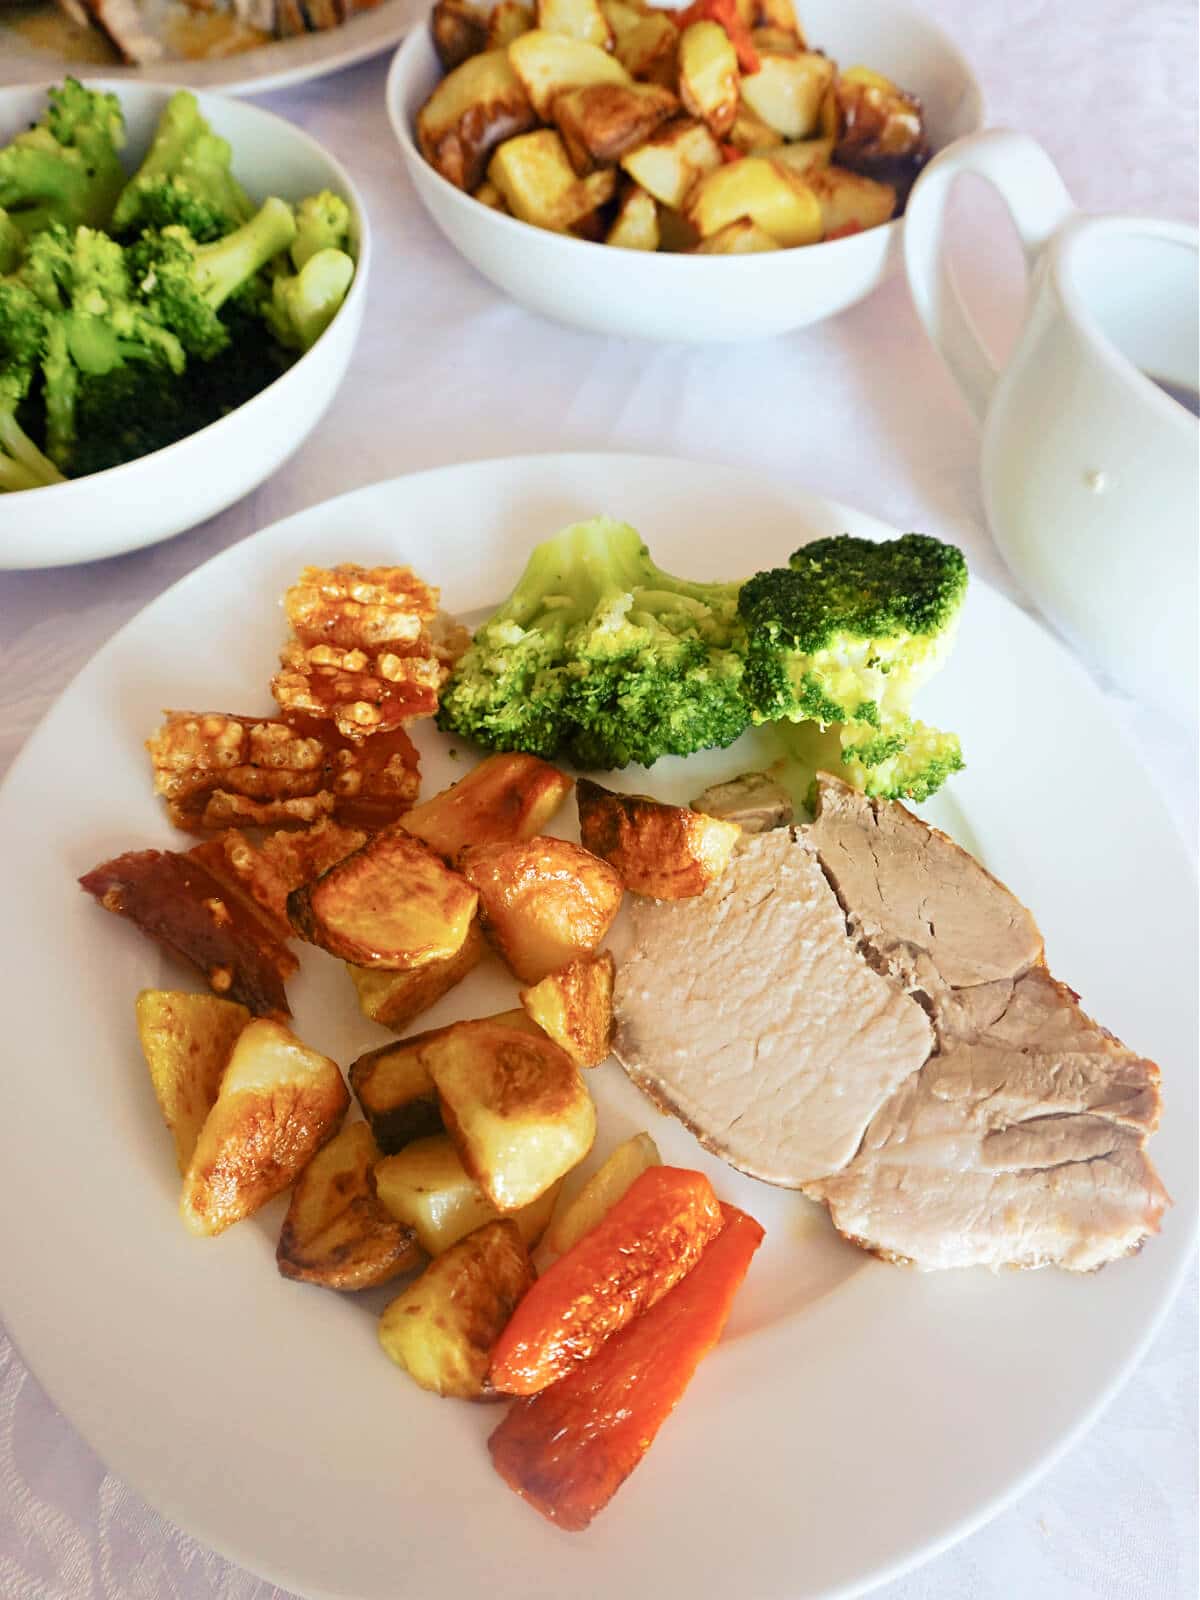 A white plate with a slice of roast pork, roasted vegetables and broccoli.